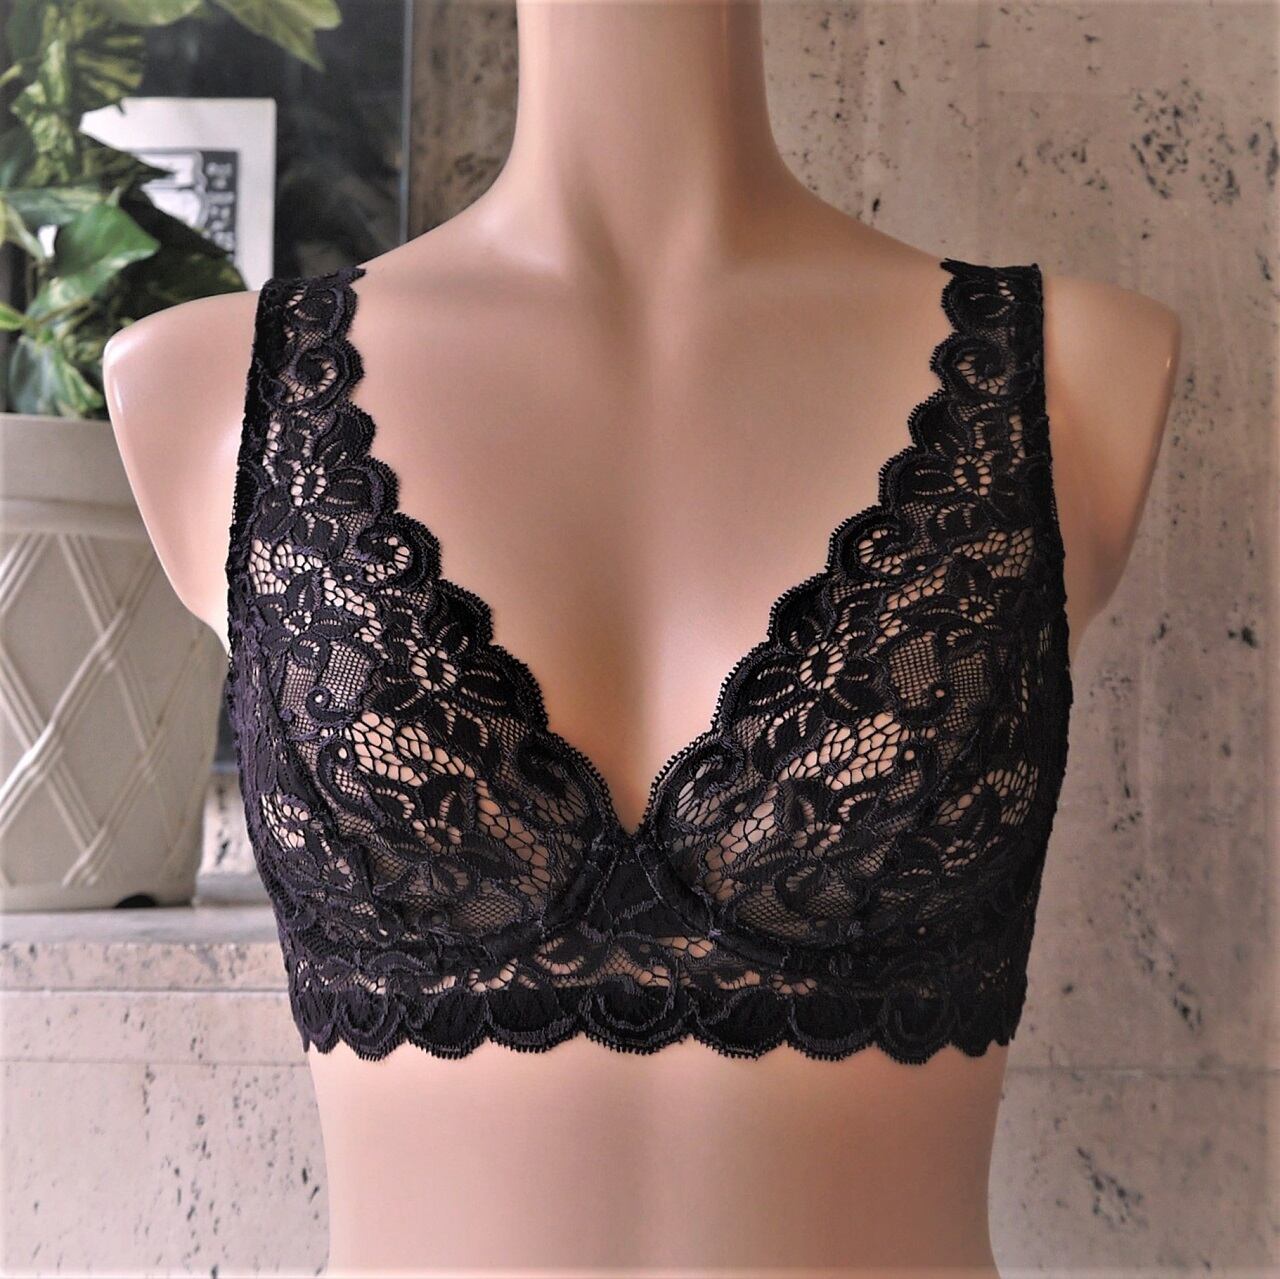 71465 HANRO Luxury Moments All Lace Soft Cup Bra